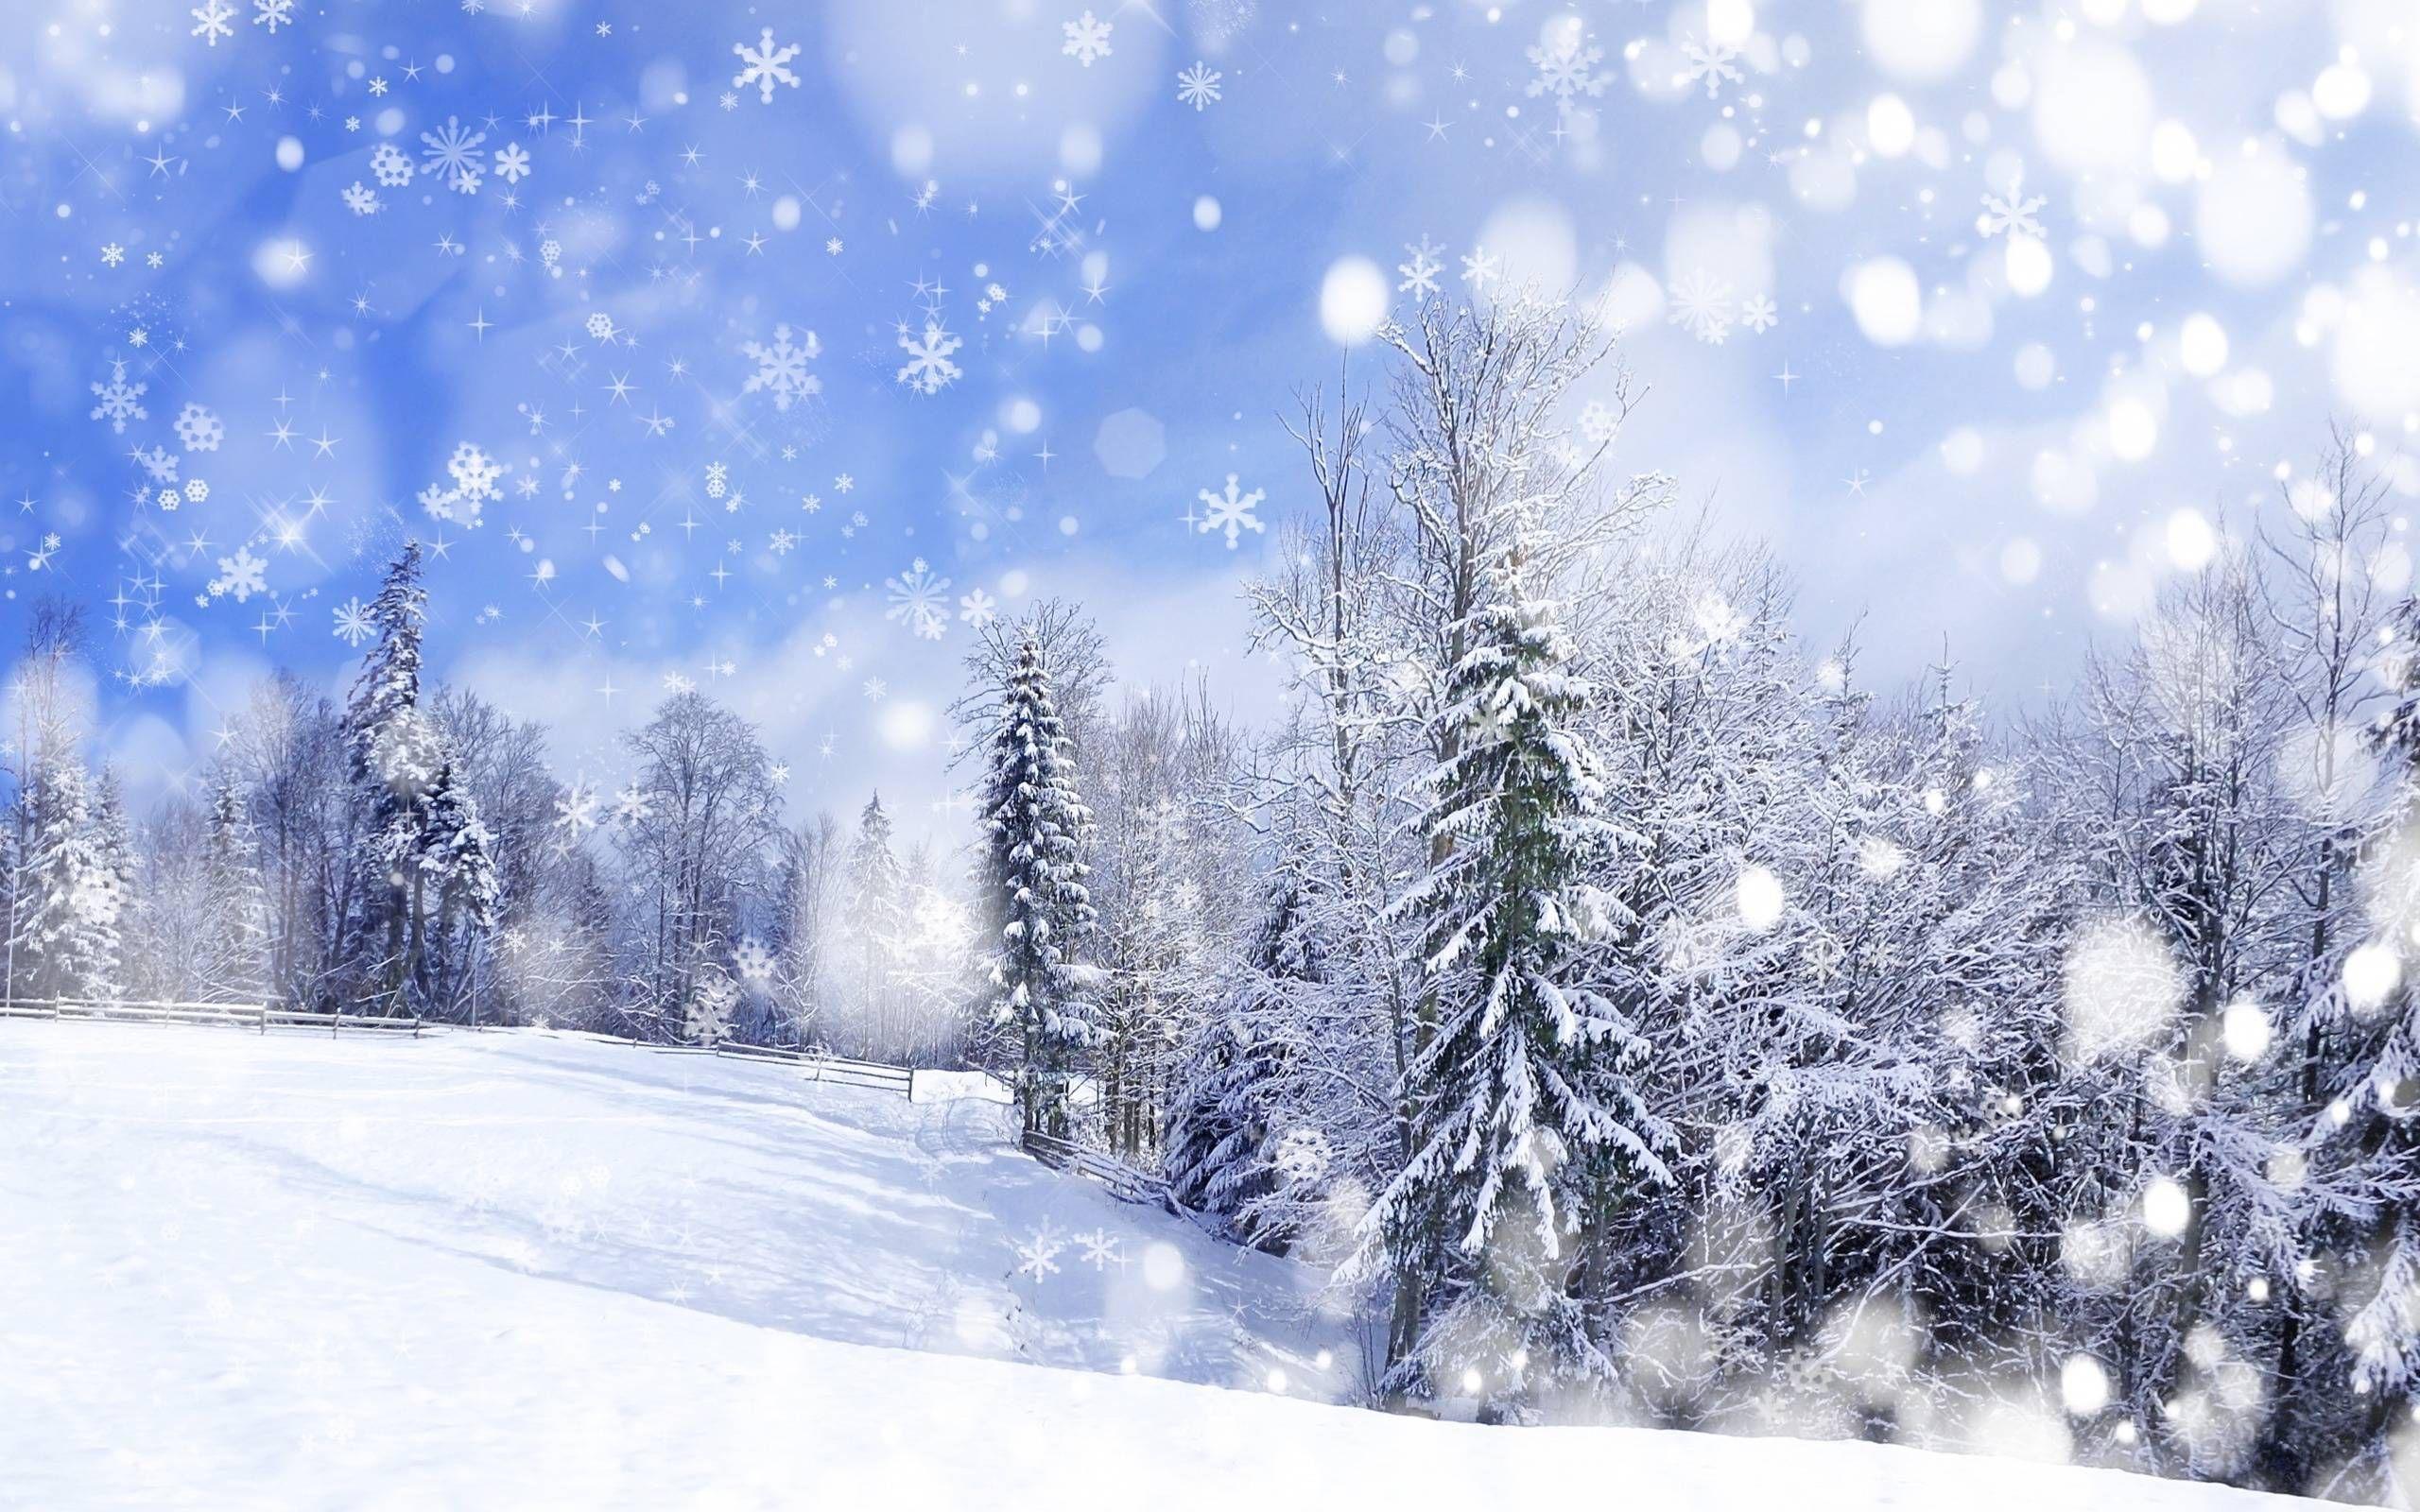 animated snow backgrounds